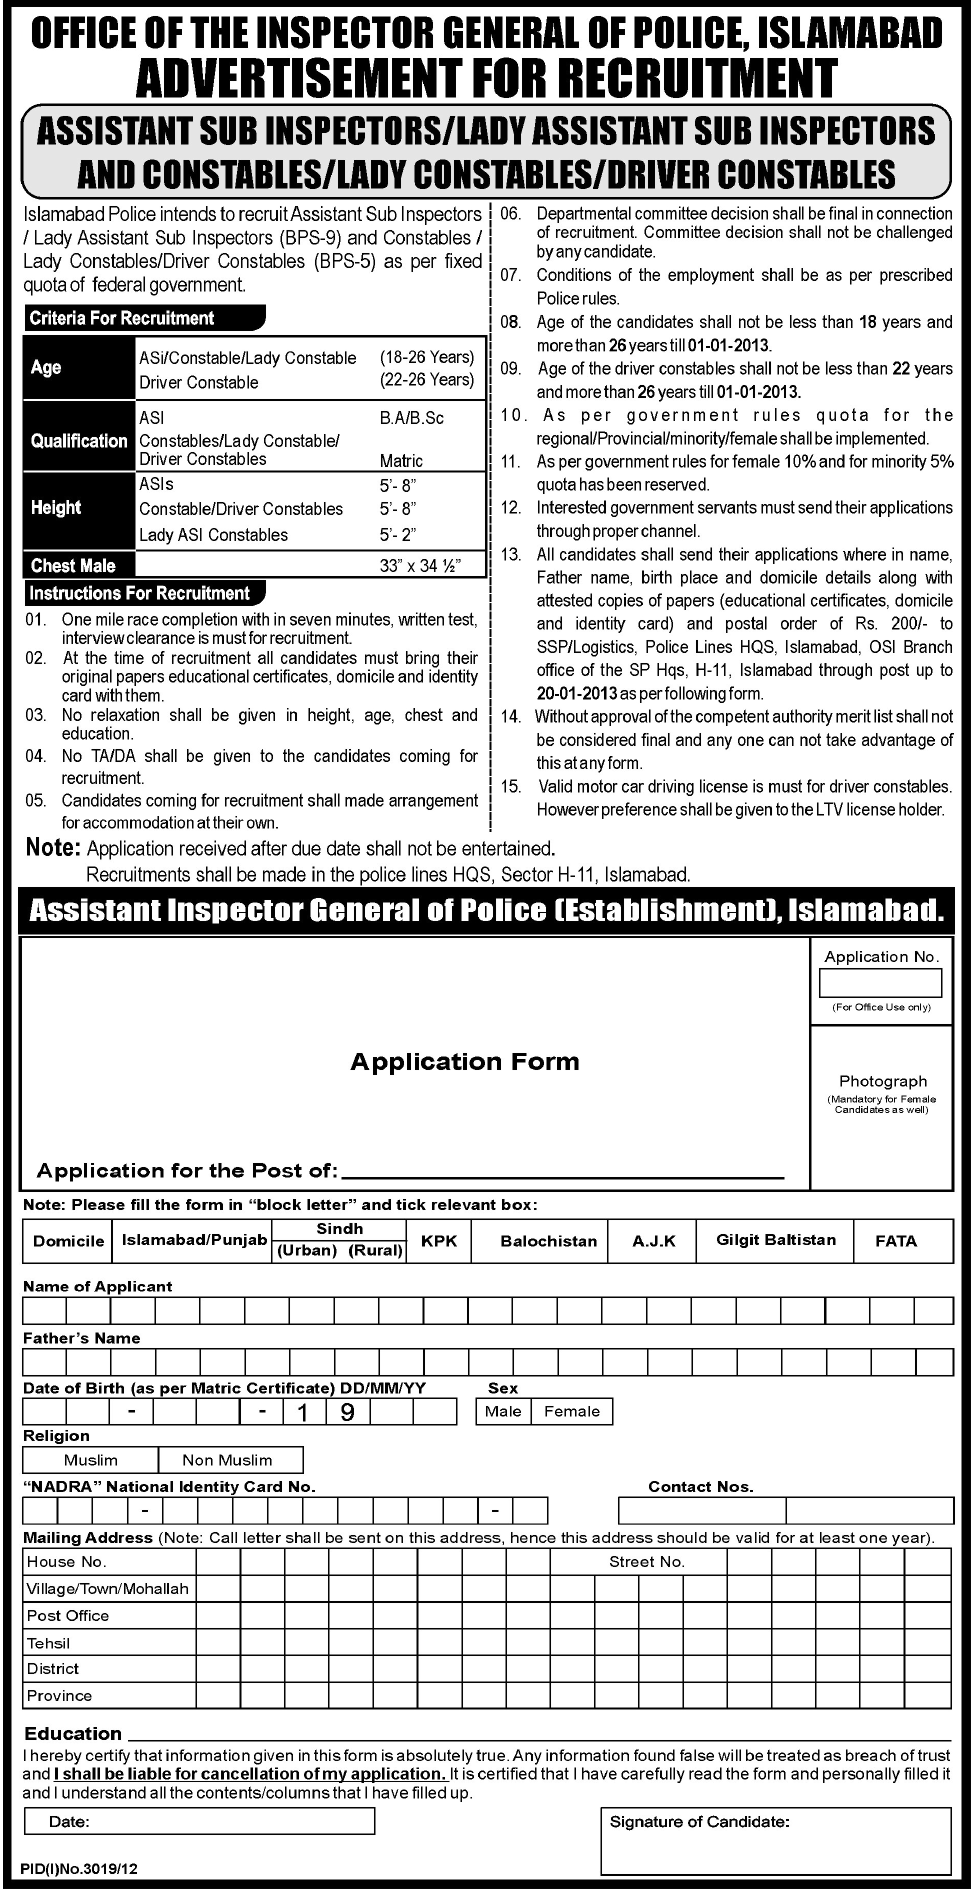 ASI & Constable Jobs in Islamabad Police 2013 Latest